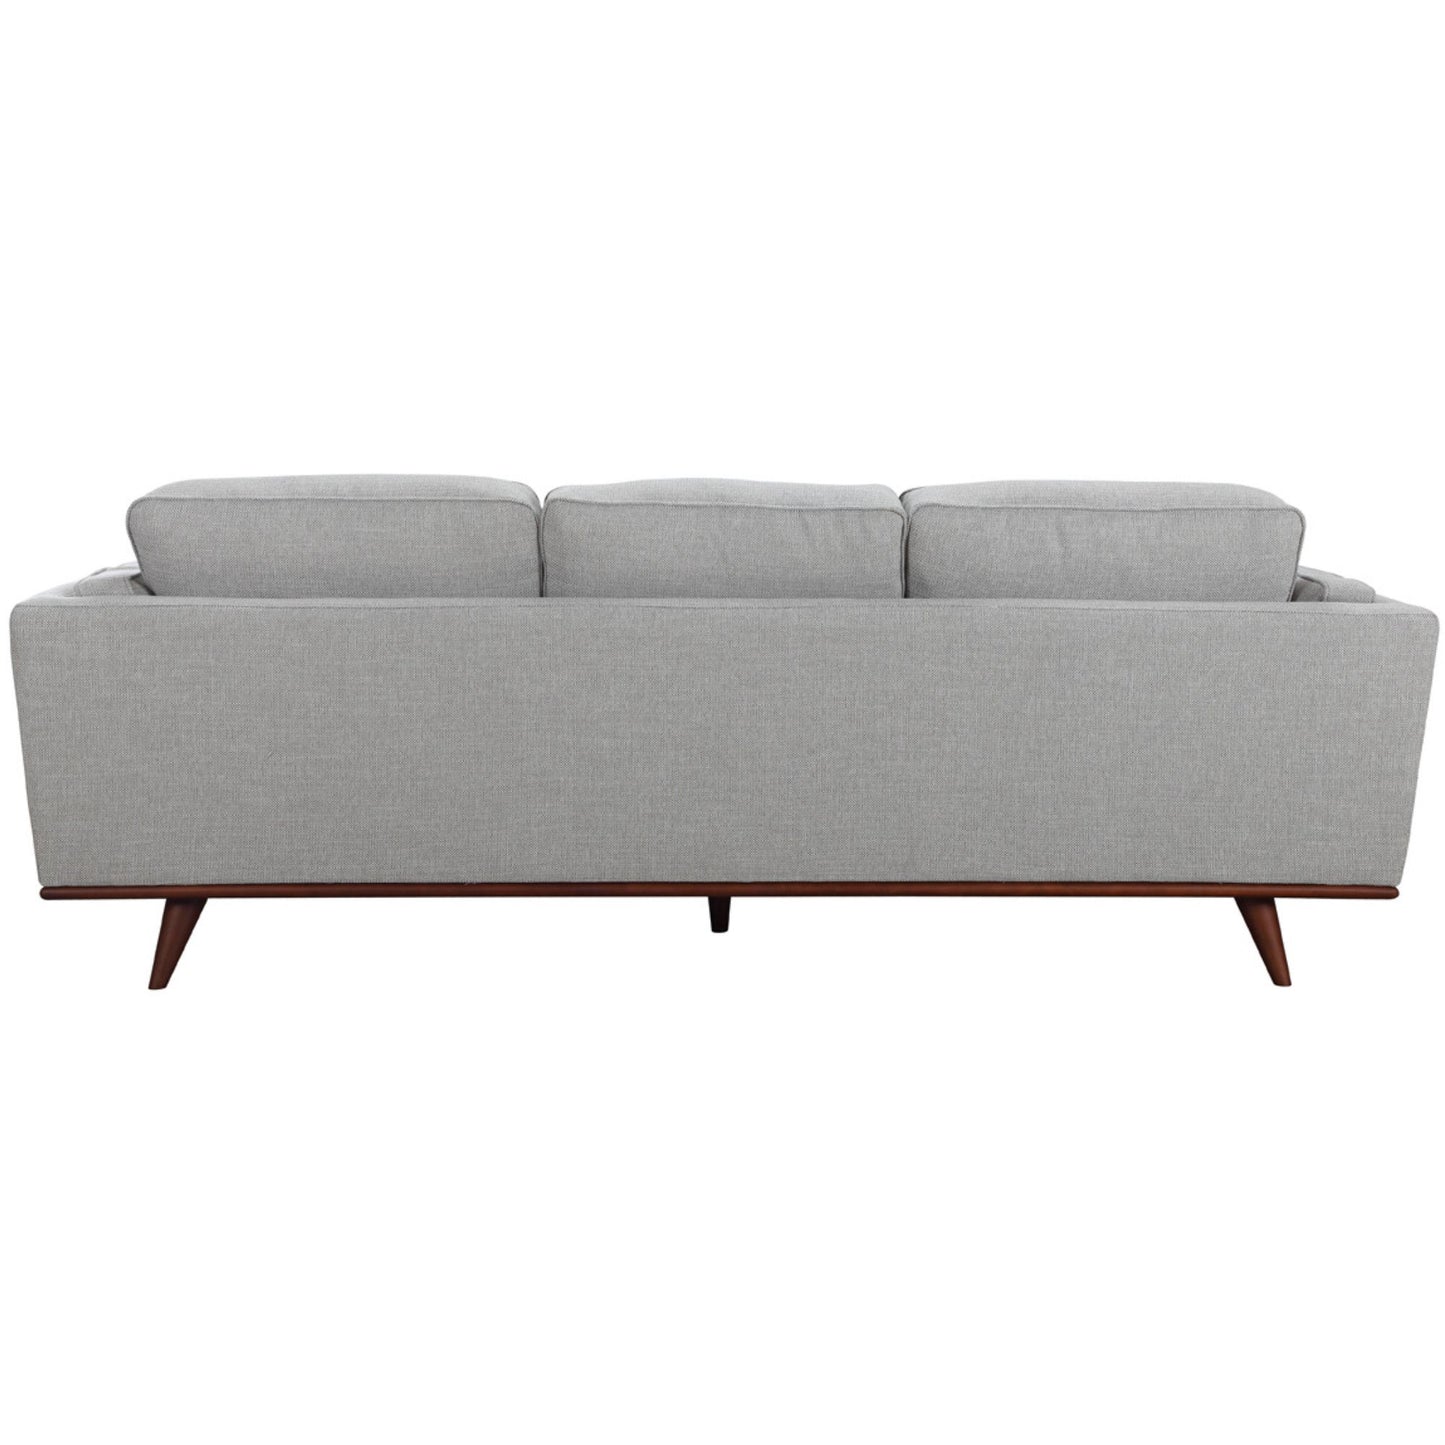 Petalsoft 3 Seater Sofa Fabric Uplholstered Lounge Couch - Grey